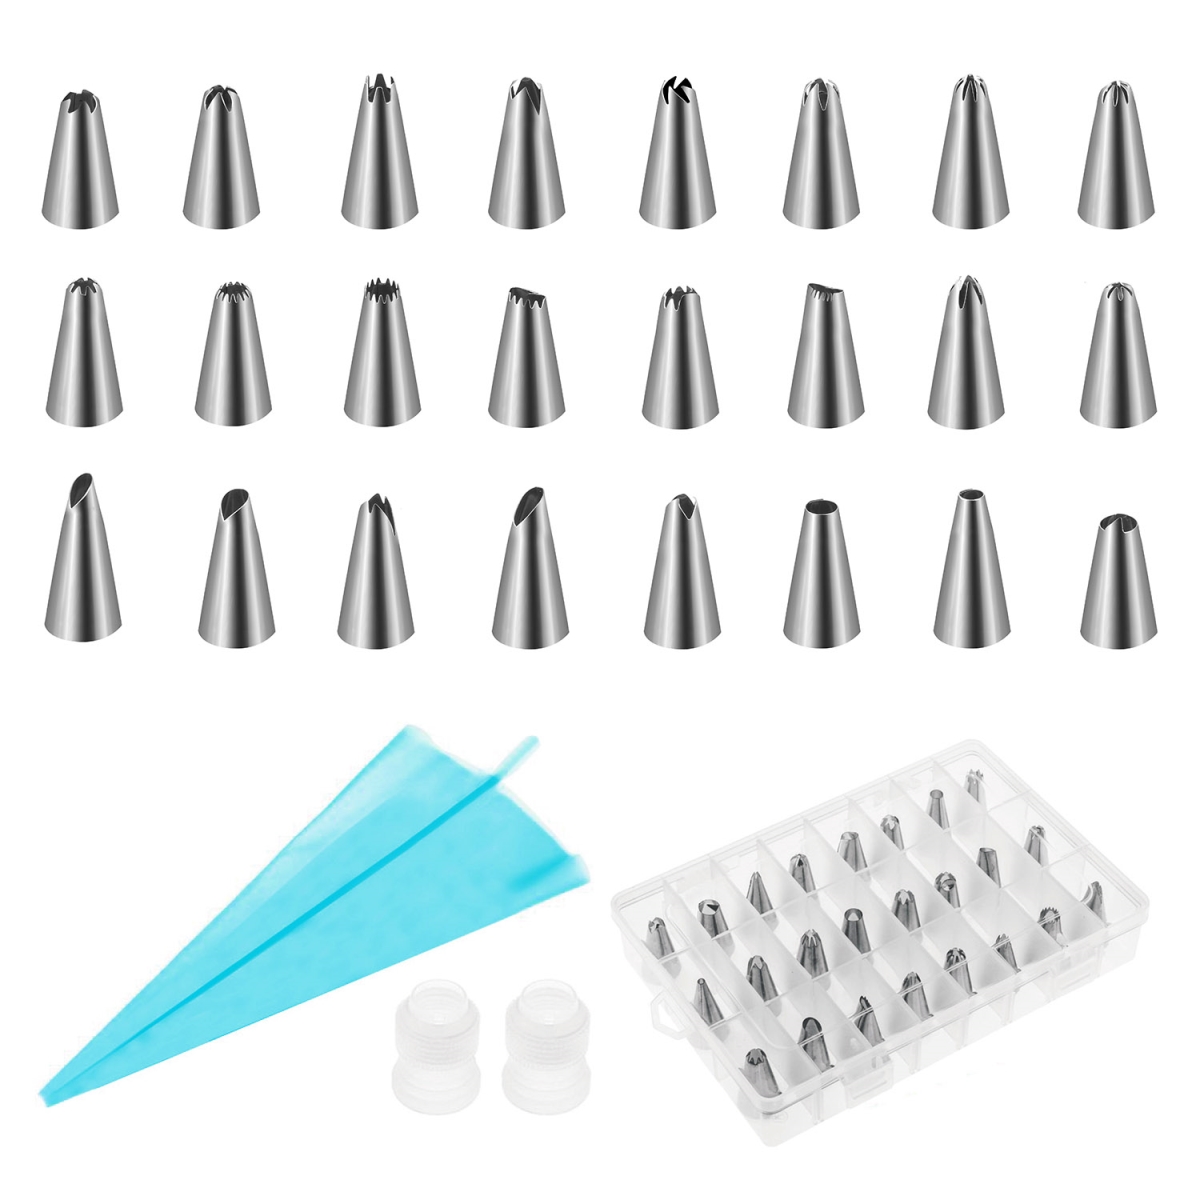 Picture of Fresh Fab Finds FFF-GPCT1210 Cake Decorating Supplies kit Stainless Steel DIY Baking Supplies Icing Tips with Pastry Bags & Disposable Coupler & Storage Case - 24 Piece